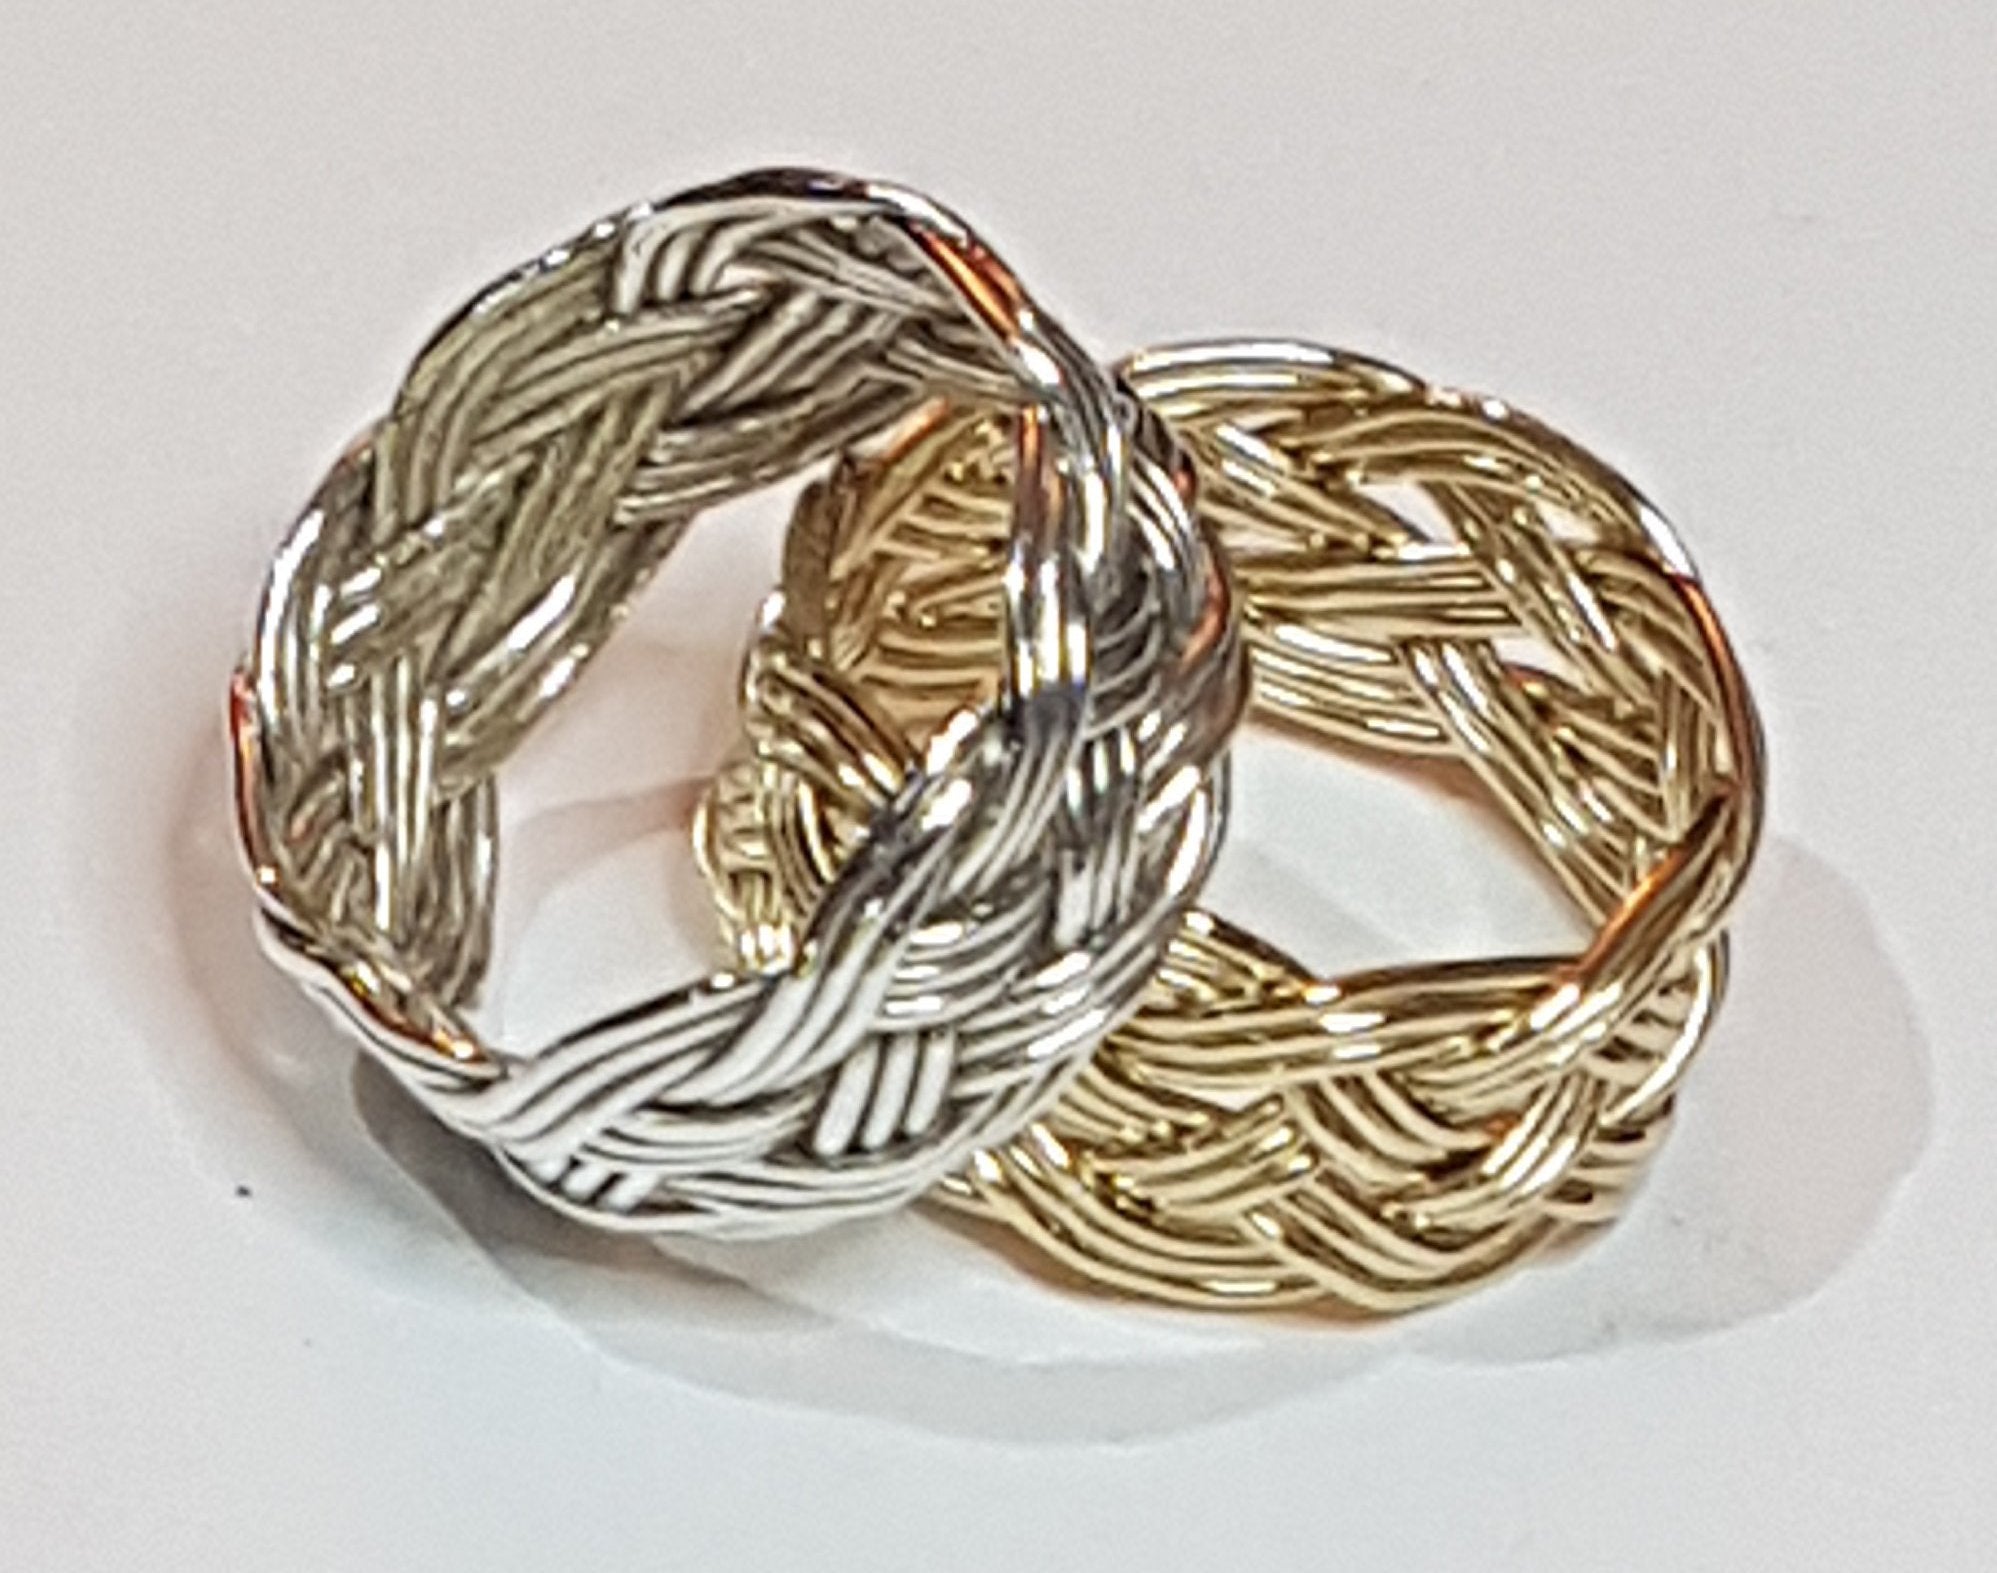 Turks Head Knot Ring, Gold - 3 strand, heavy weight